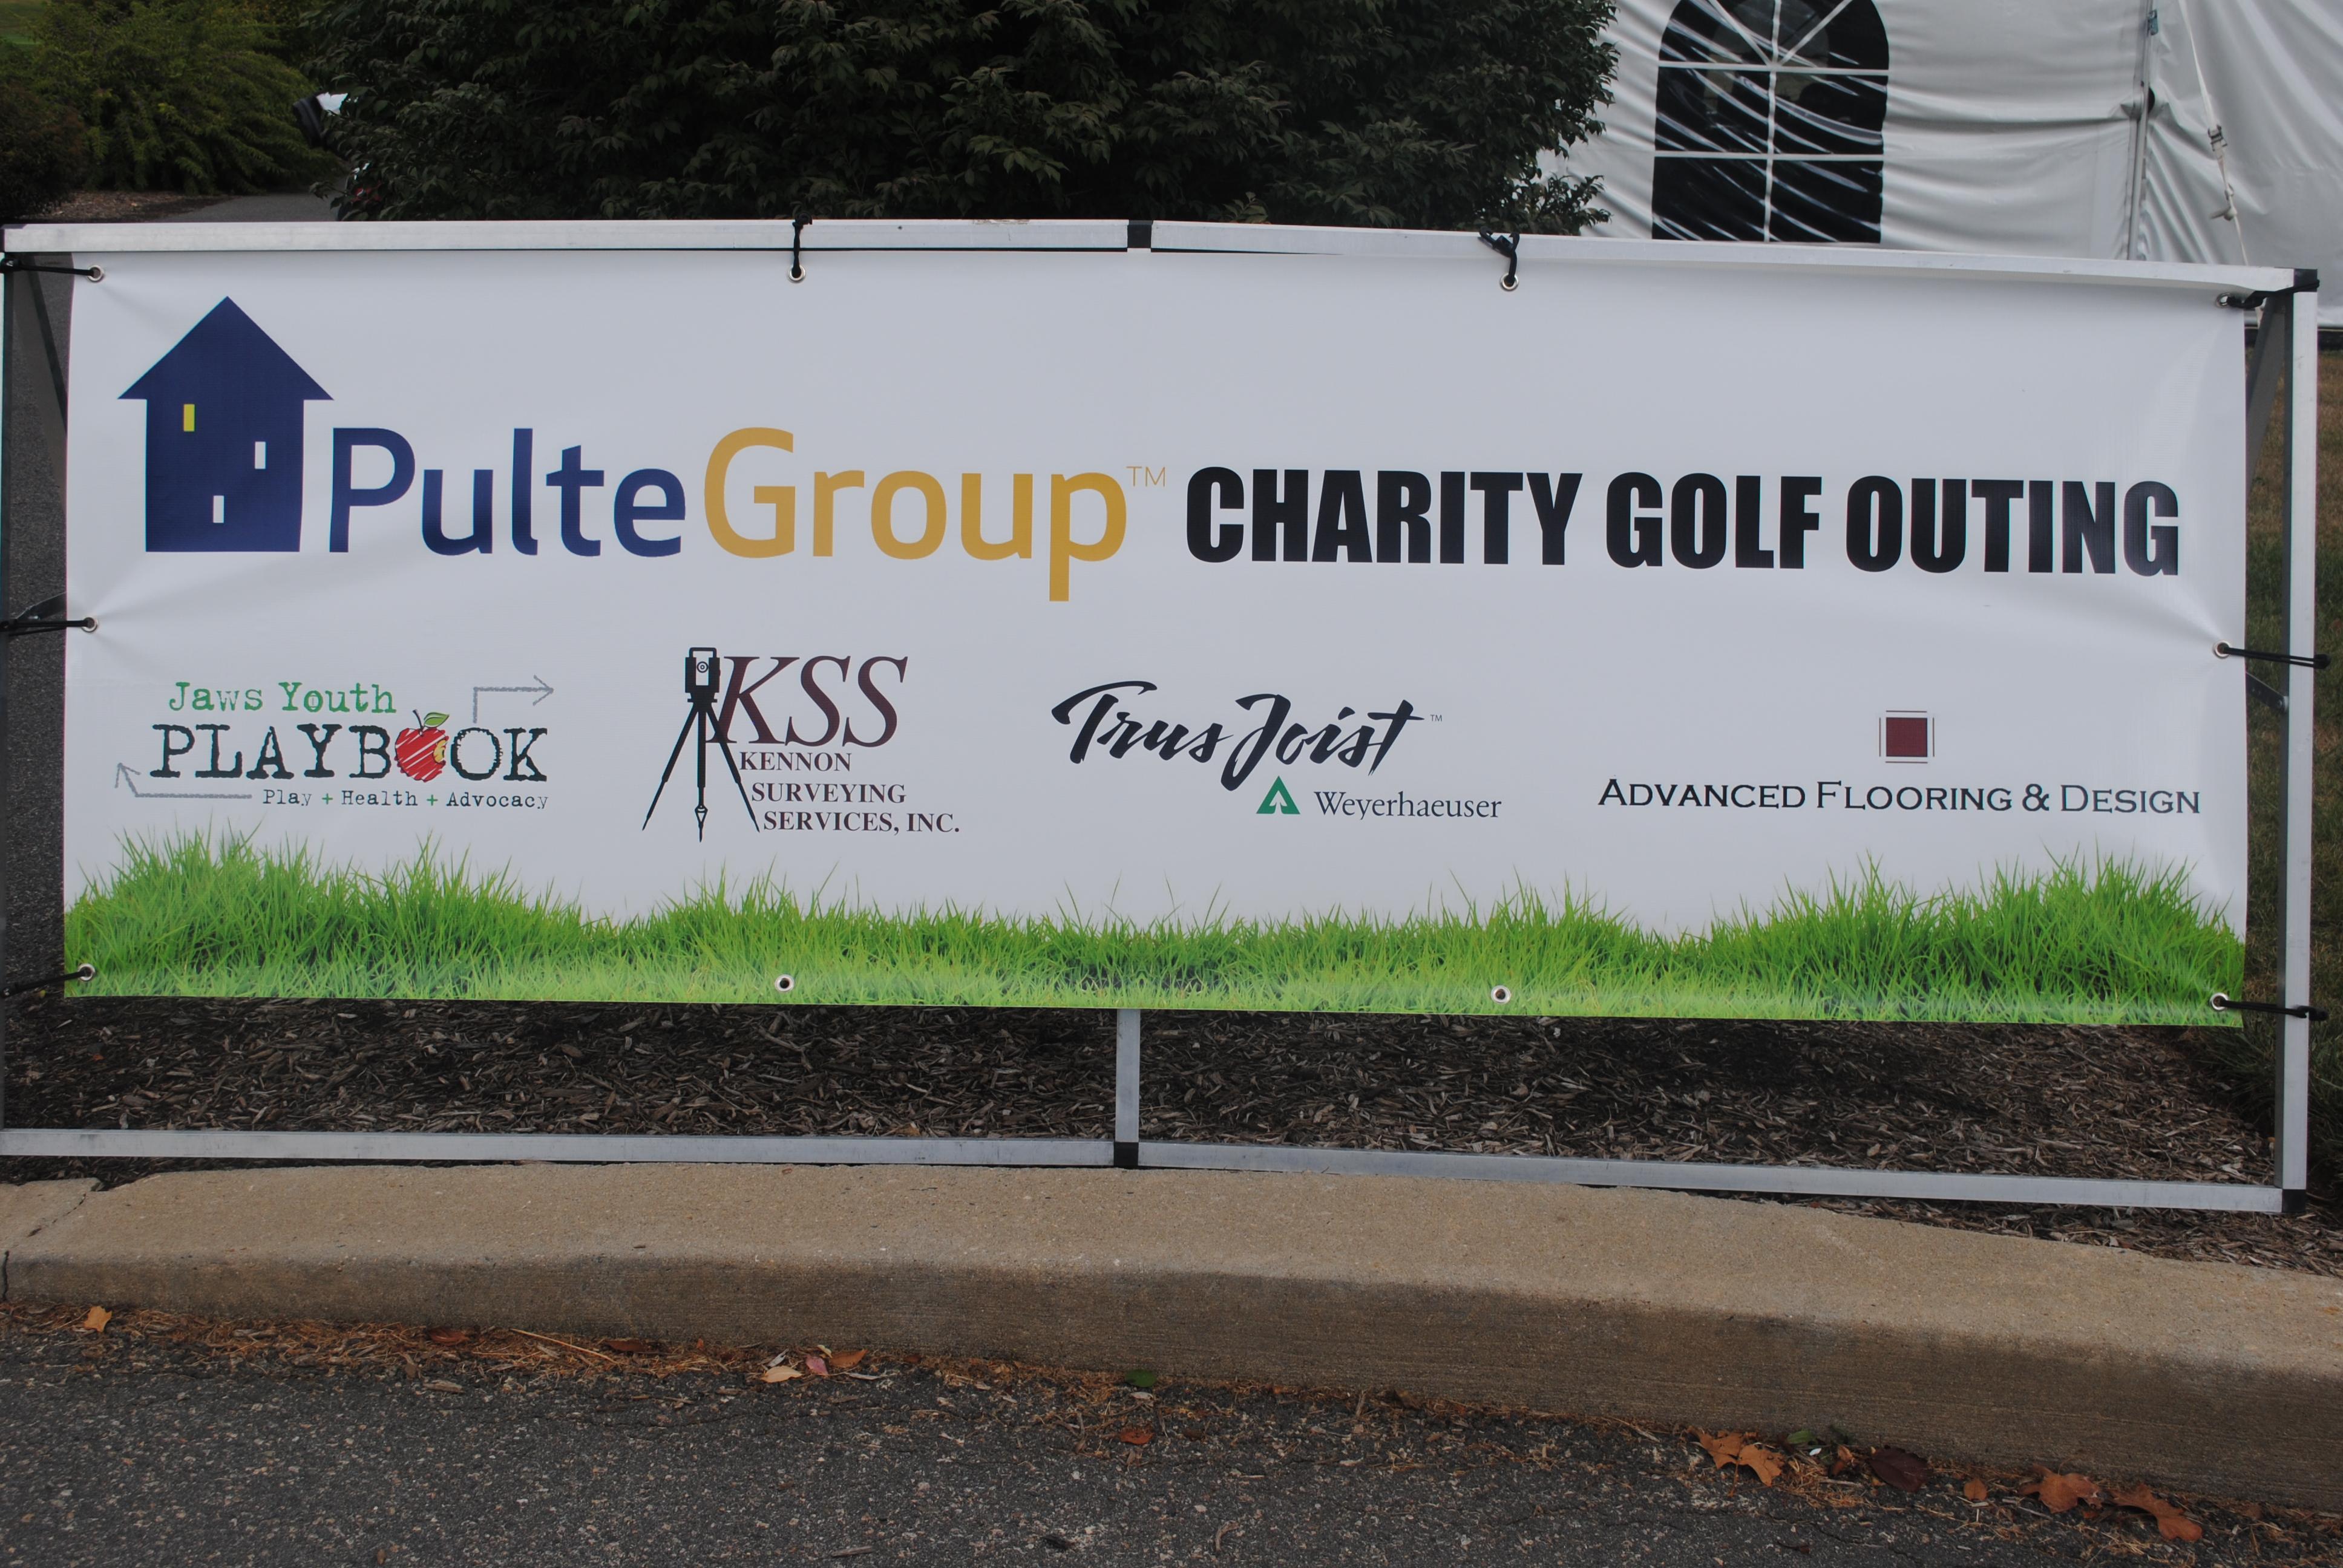 2018 Pulte Group Charity Golf Tournament / Jaws Youth Playbook